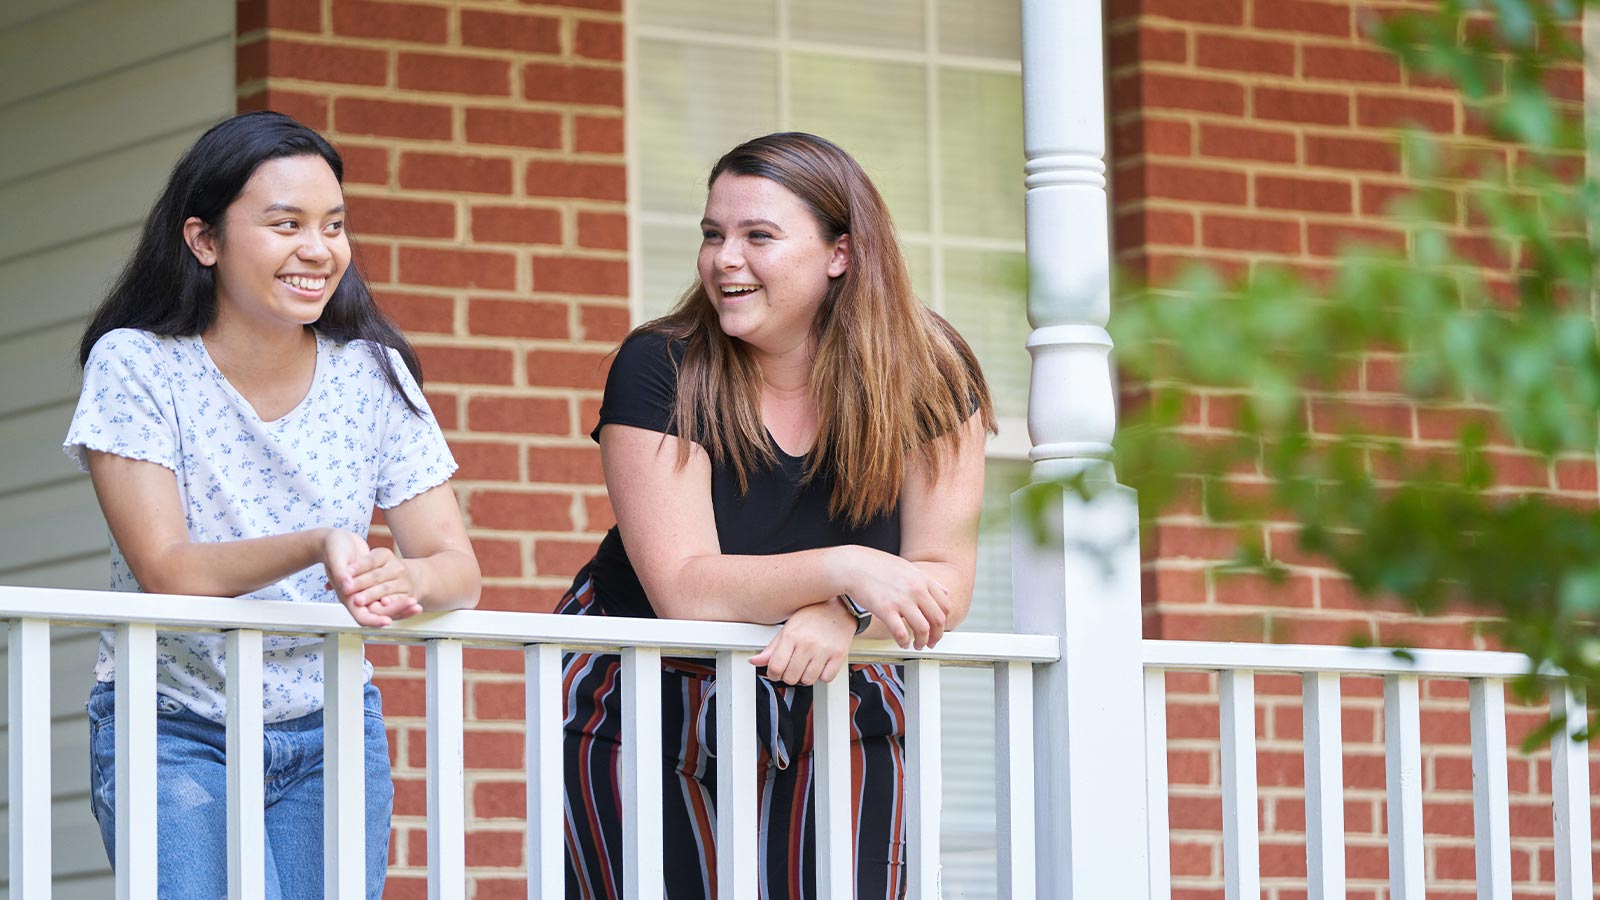 Two young women leaning on a porch railing, smiling and conversing.